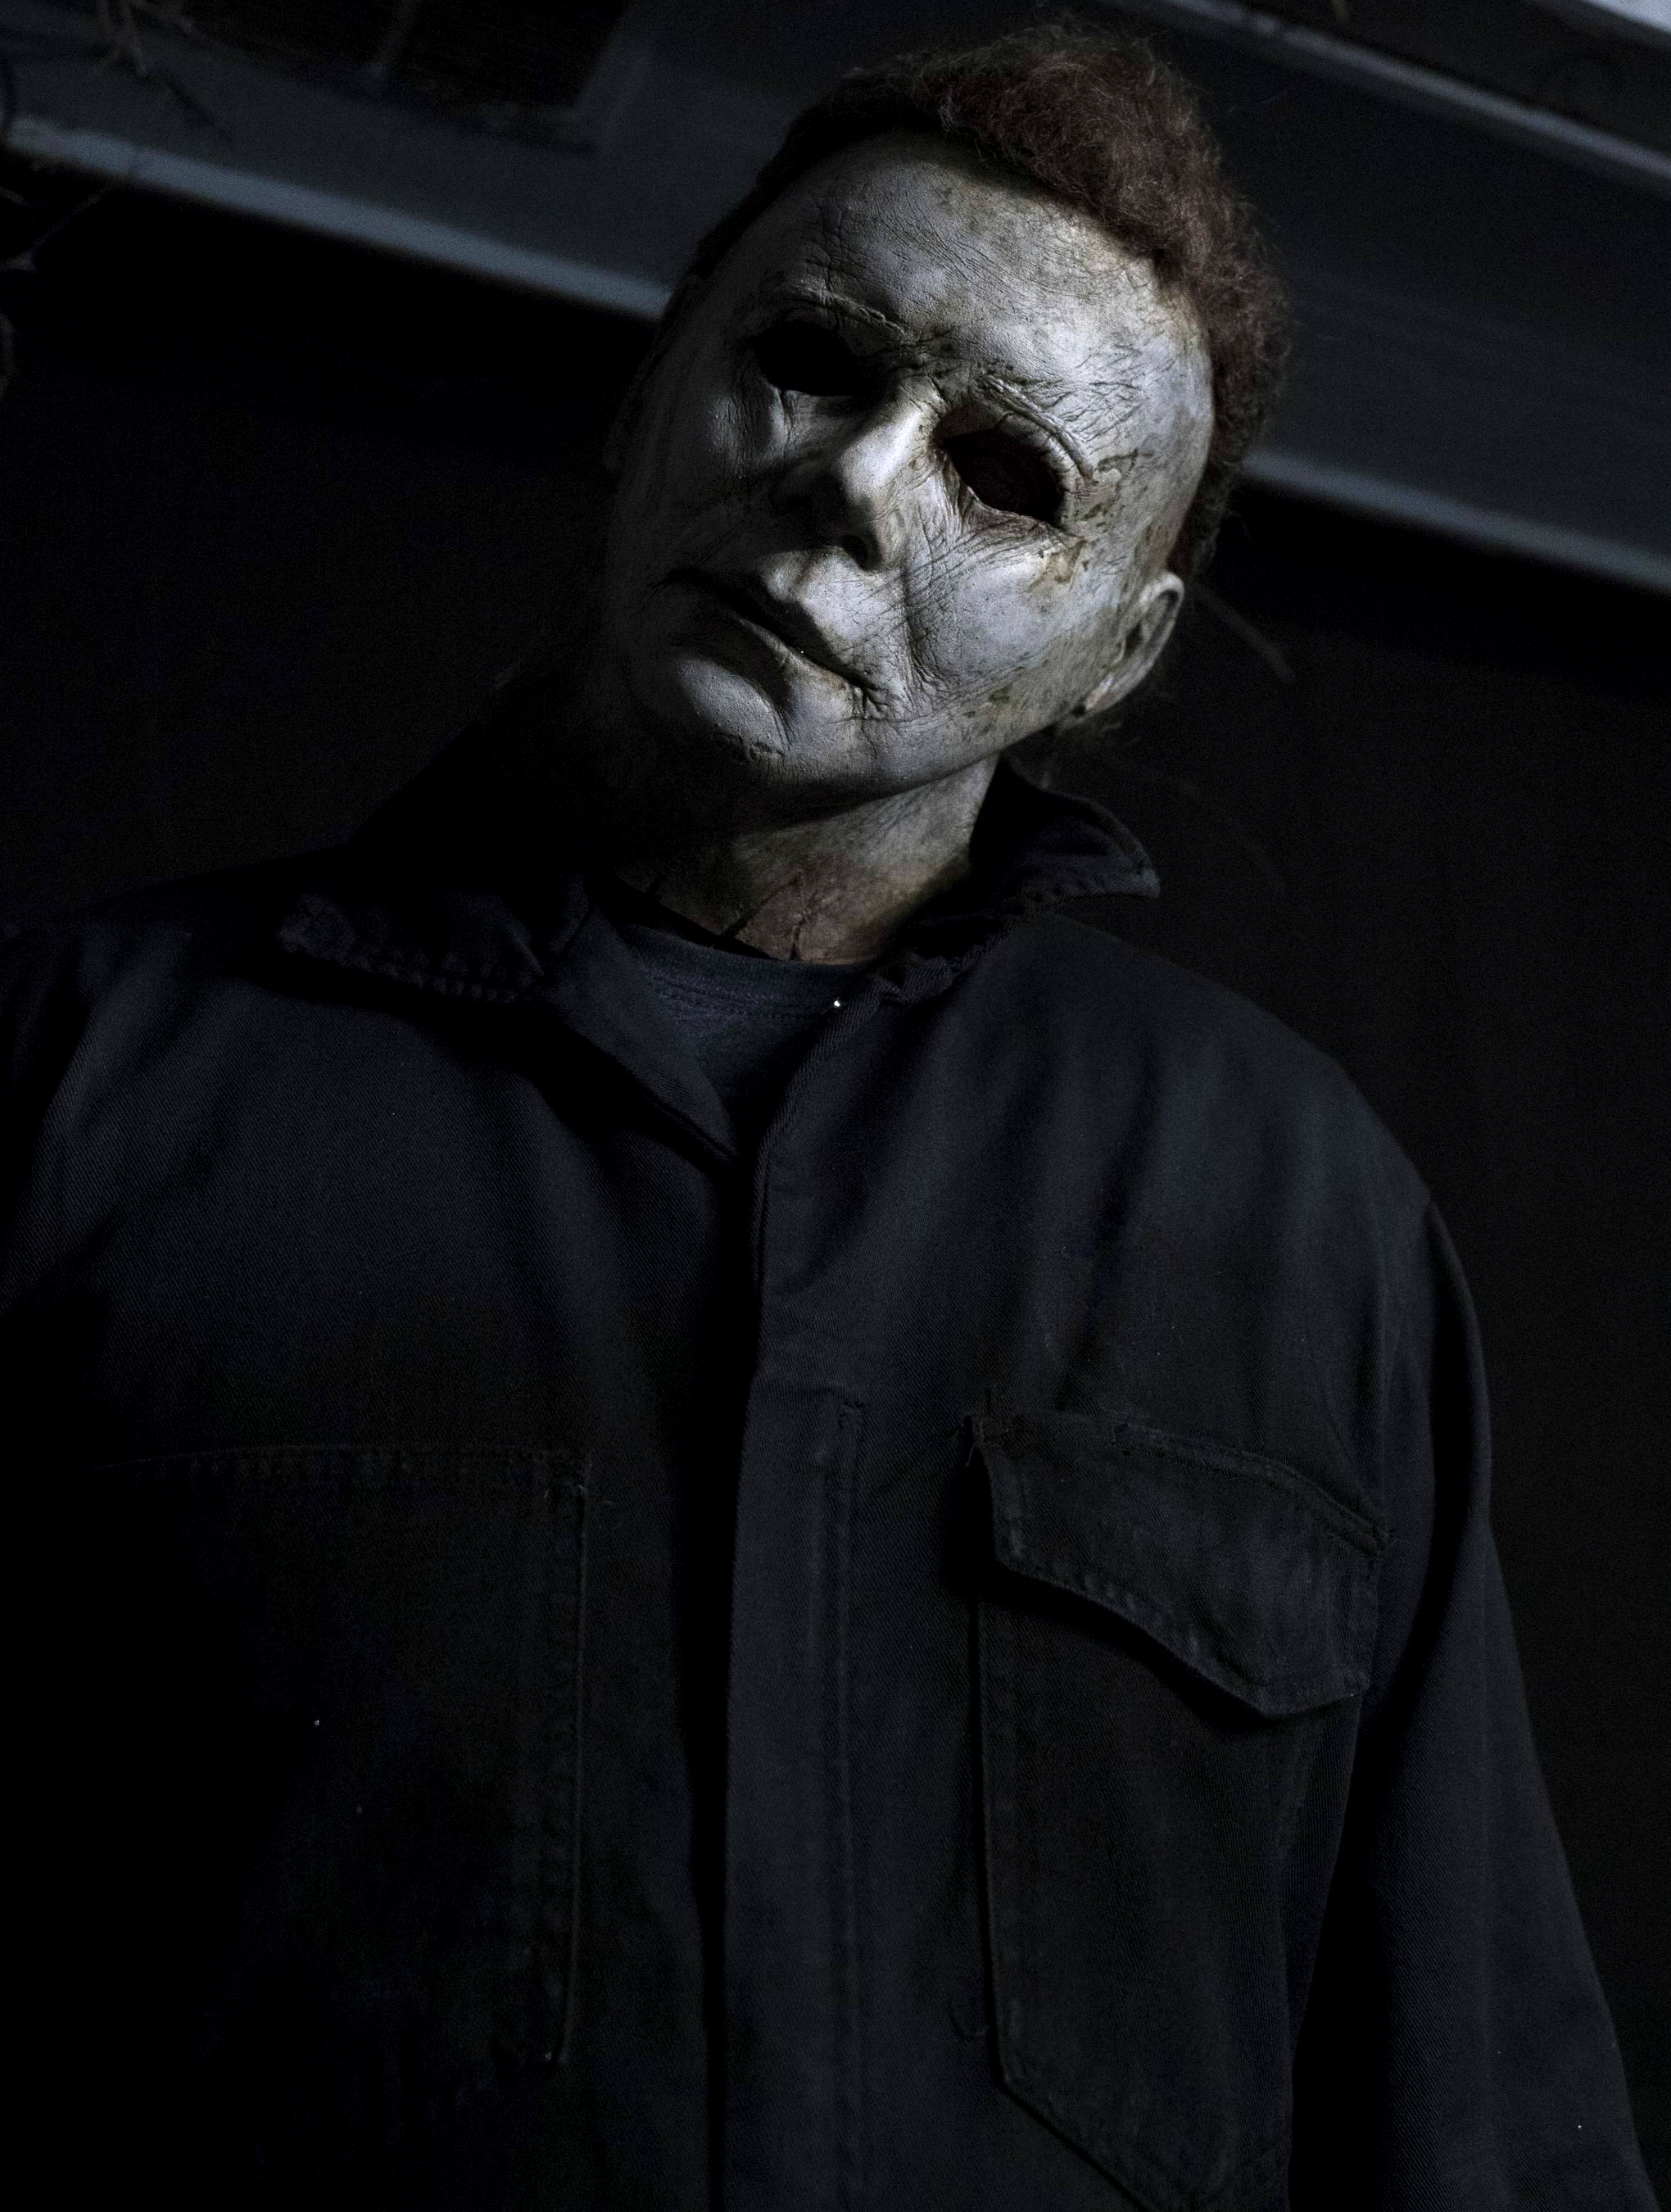 mical myers